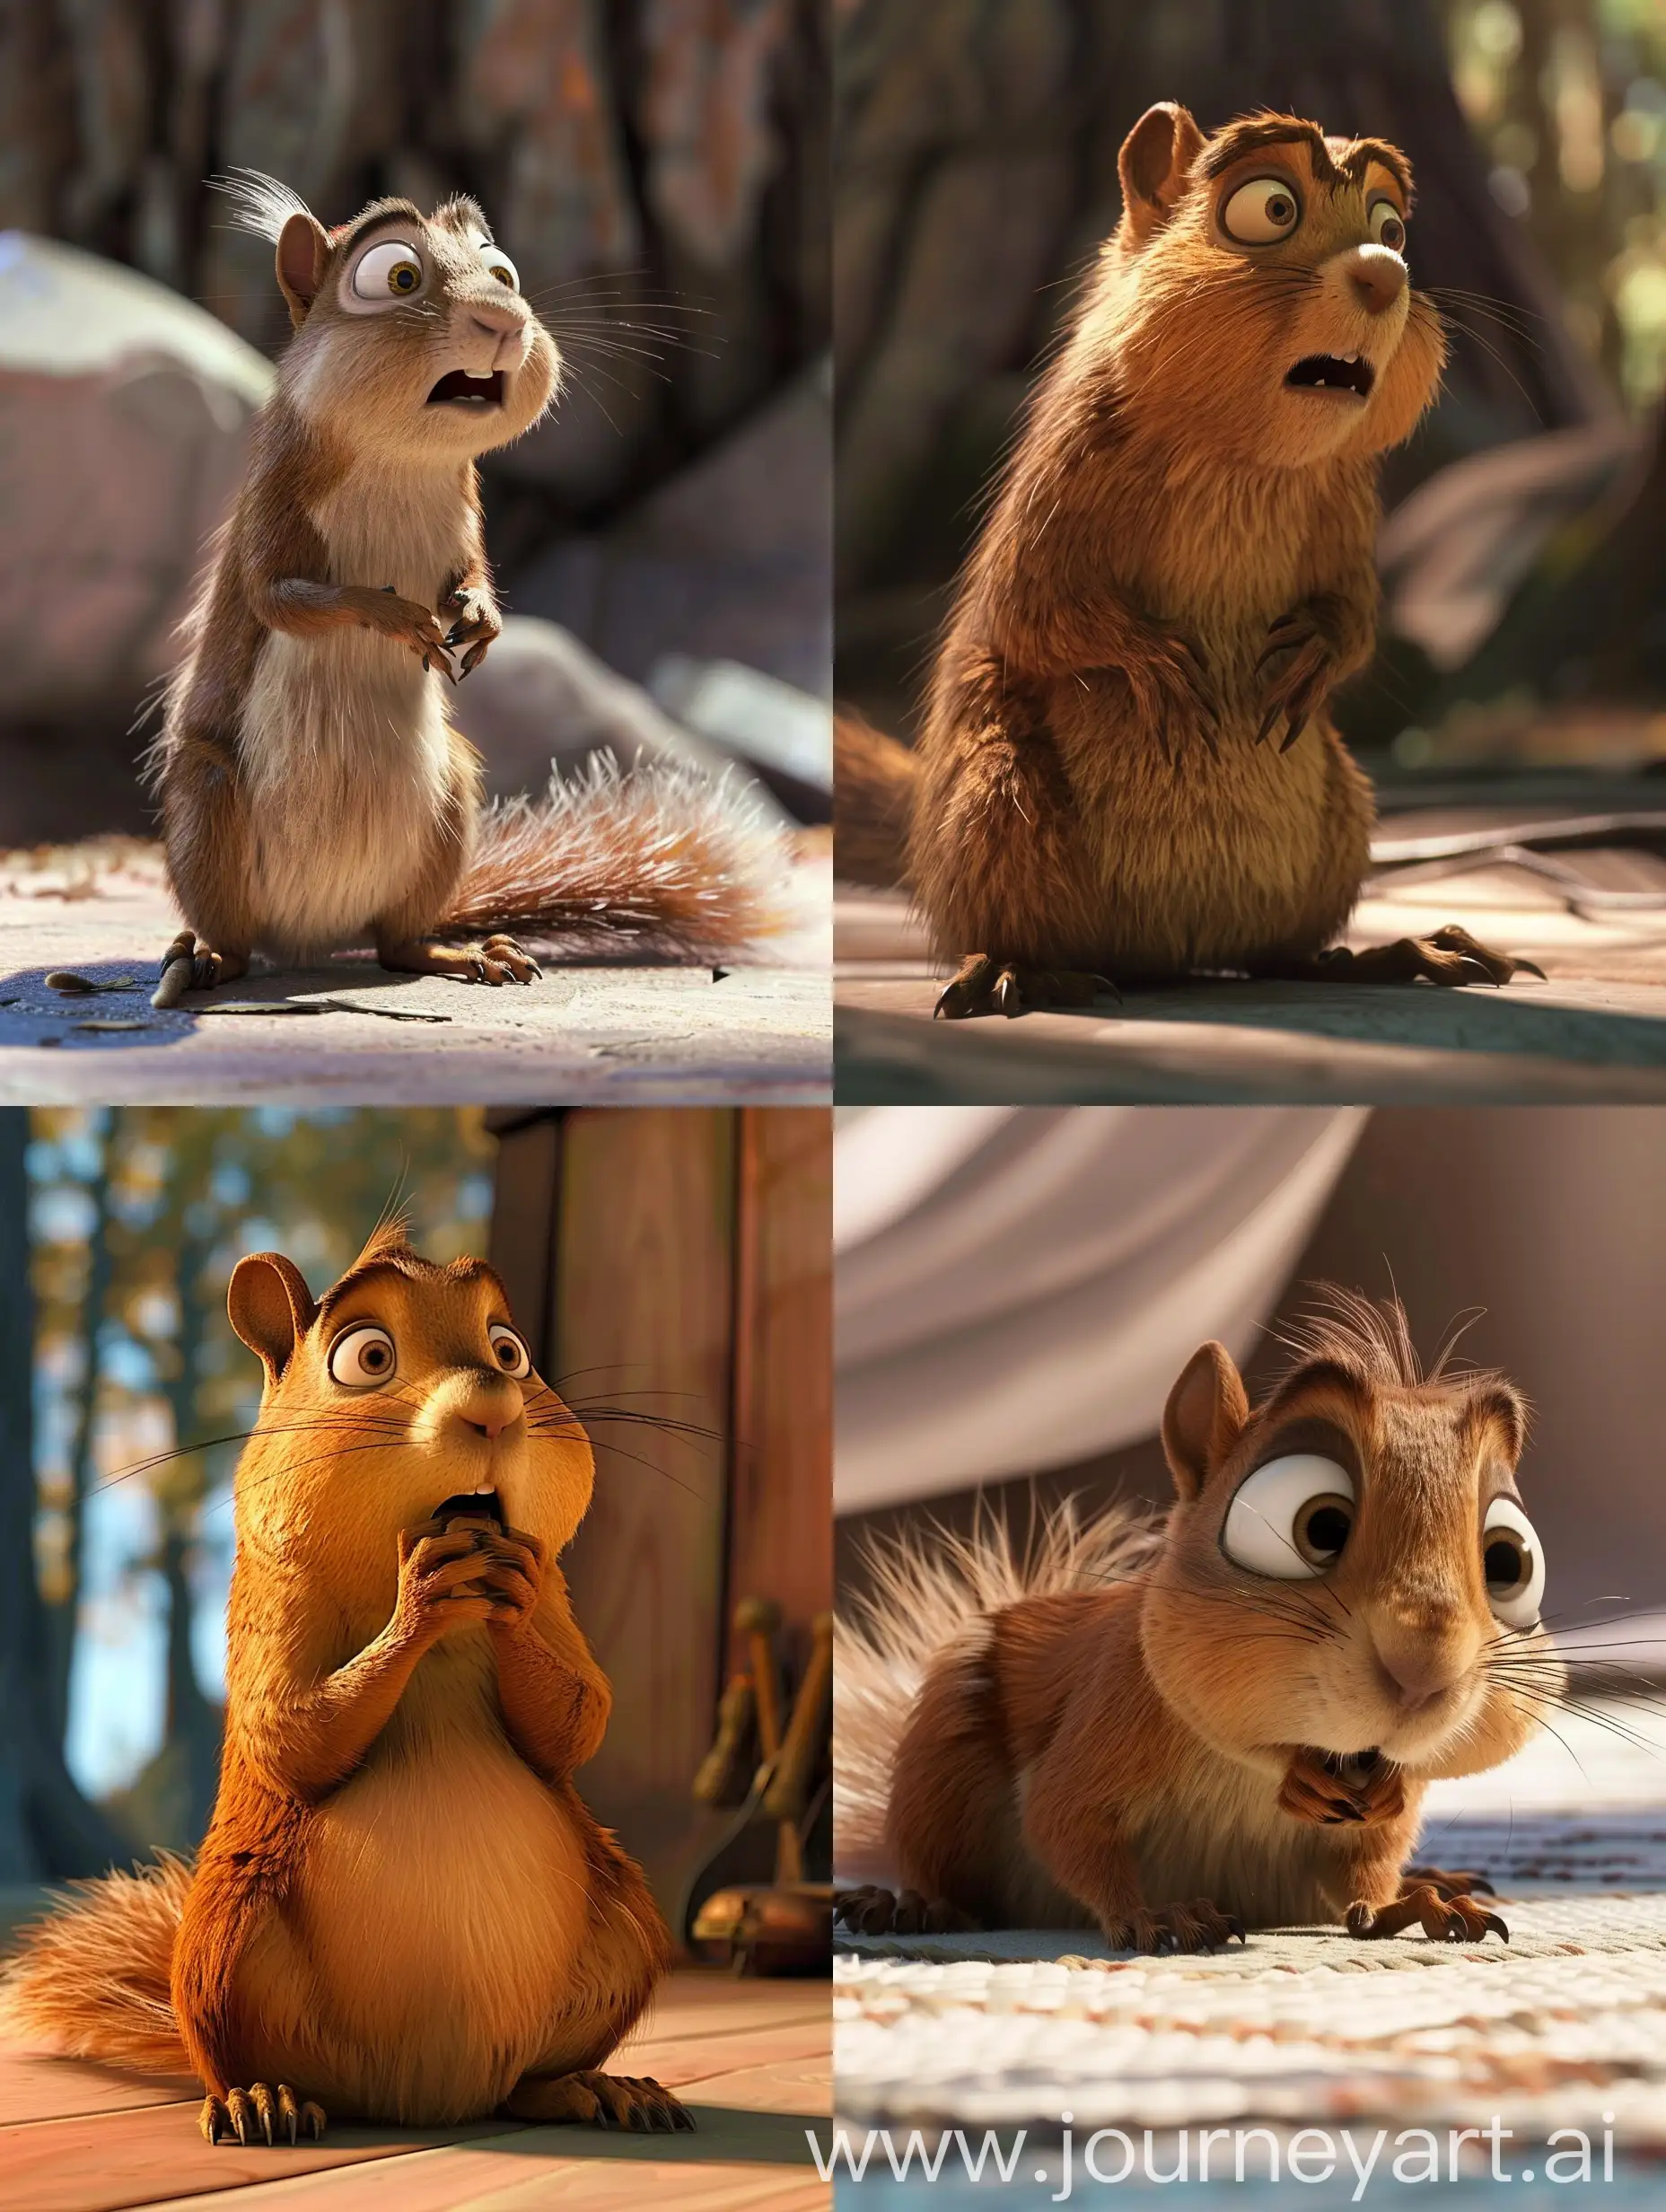 pixar animated image of a brown squirrel, is restless, sleepless, very anxious